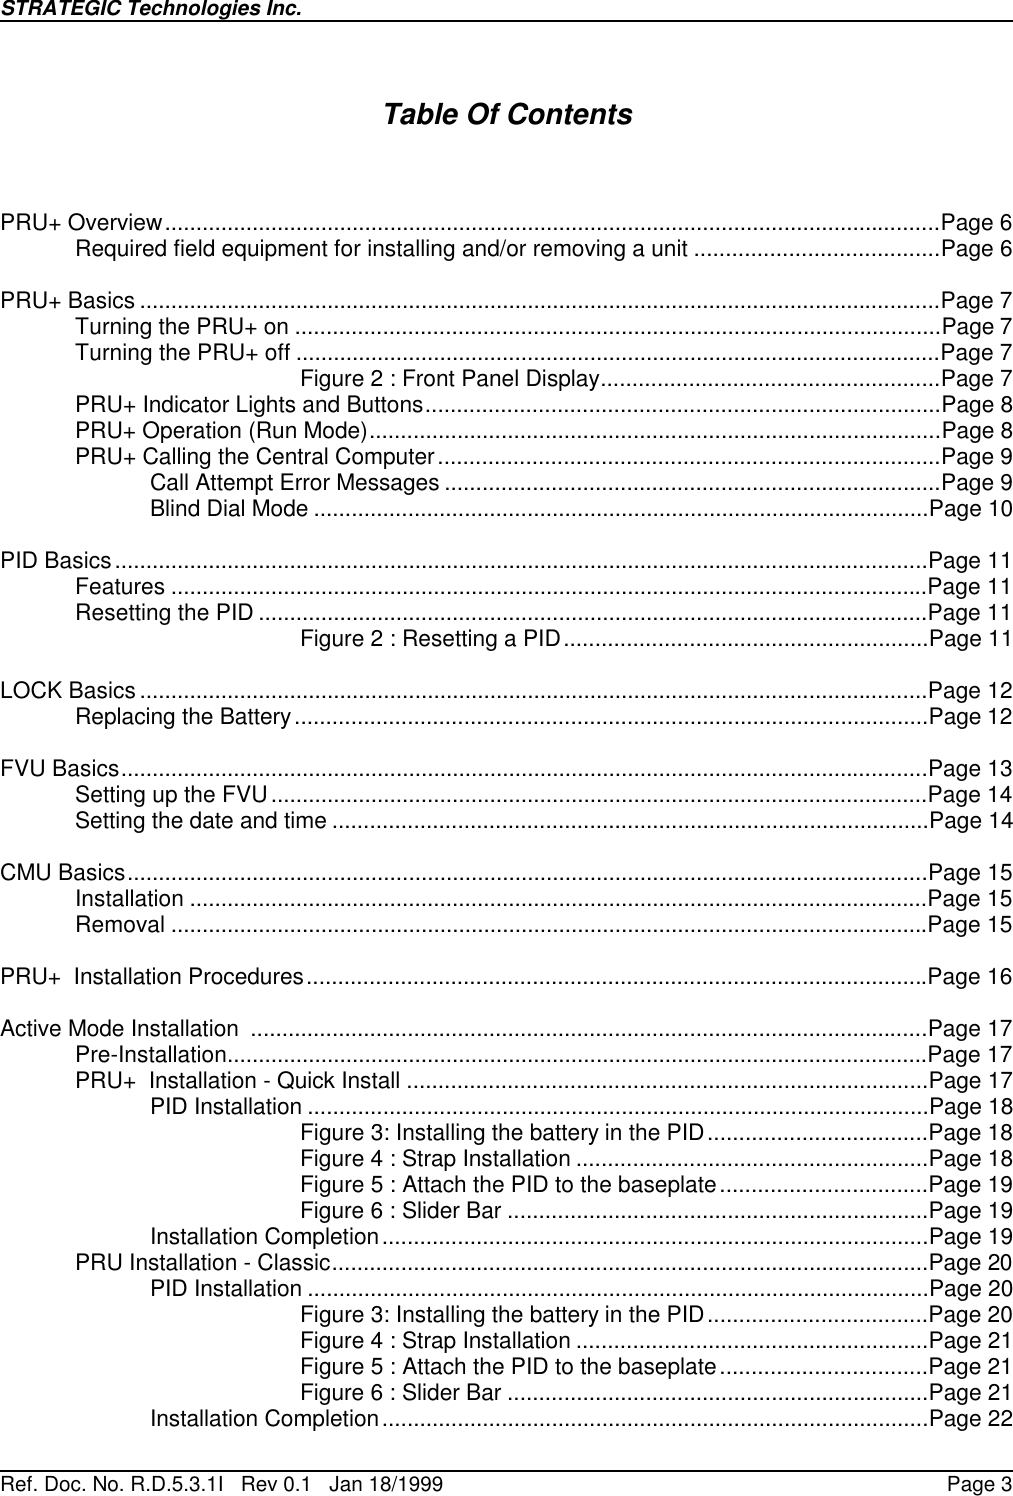 STRATEGIC Technologies Inc.Ref. Doc. No. R.D.5.3.1I   Rev 0.1   Jan 18/1999 Page 3Table Of ContentsPRU+ Overview............................................................................................................................Page 6Required field equipment for installing and/or removing a unit .......................................Page 6PRU+ Basics ................................................................................................................................Page 7Turning the PRU+ on .......................................................................................................Page 7Turning the PRU+ off .......................................................................................................Page 7Figure 2 : Front Panel Display......................................................Page 7PRU+ Indicator Lights and Buttons..................................................................................Page 8PRU+ Operation (Run Mode)...........................................................................................Page 8PRU+ Calling the Central Computer................................................................................Page 9Call Attempt Error Messages ...............................................................................Page 9Blind Dial Mode ..................................................................................................Page 10PID Basics..................................................................................................................................Page 11Features .........................................................................................................................Page 11Resetting the PID ...........................................................................................................Page 11Figure 2 : Resetting a PID..........................................................Page 11LOCK Basics ..............................................................................................................................Page 12Replacing the Battery.....................................................................................................Page 12FVU Basics.................................................................................................................................Page 13Setting up the FVU .........................................................................................................Page 14Setting the date and time ...............................................................................................Page 14CMU Basics................................................................................................................................Page 15Installation ......................................................................................................................Page 15Removal .........................................................................................................................Page 15PRU+  Installation Procedures...................................................................................................Page 16Active Mode Installation  ............................................................................................................Page 17Pre-Installation................................................................................................................Page 17PRU+  Installation - Quick Install ...................................................................................Page 17PID Installation ...................................................................................................Page 18Figure 3: Installing the battery in the PID...................................Page 18Figure 4 : Strap Installation ........................................................Page 18Figure 5 : Attach the PID to the baseplate.................................Page 19Figure 6 : Slider Bar ...................................................................Page 19Installation Completion.......................................................................................Page 19PRU Installation - Classic...............................................................................................Page 20PID Installation ...................................................................................................Page 20Figure 3: Installing the battery in the PID...................................Page 20Figure 4 : Strap Installation ........................................................Page 21Figure 5 : Attach the PID to the baseplate.................................Page 21Figure 6 : Slider Bar ...................................................................Page 21Installation Completion.......................................................................................Page 22